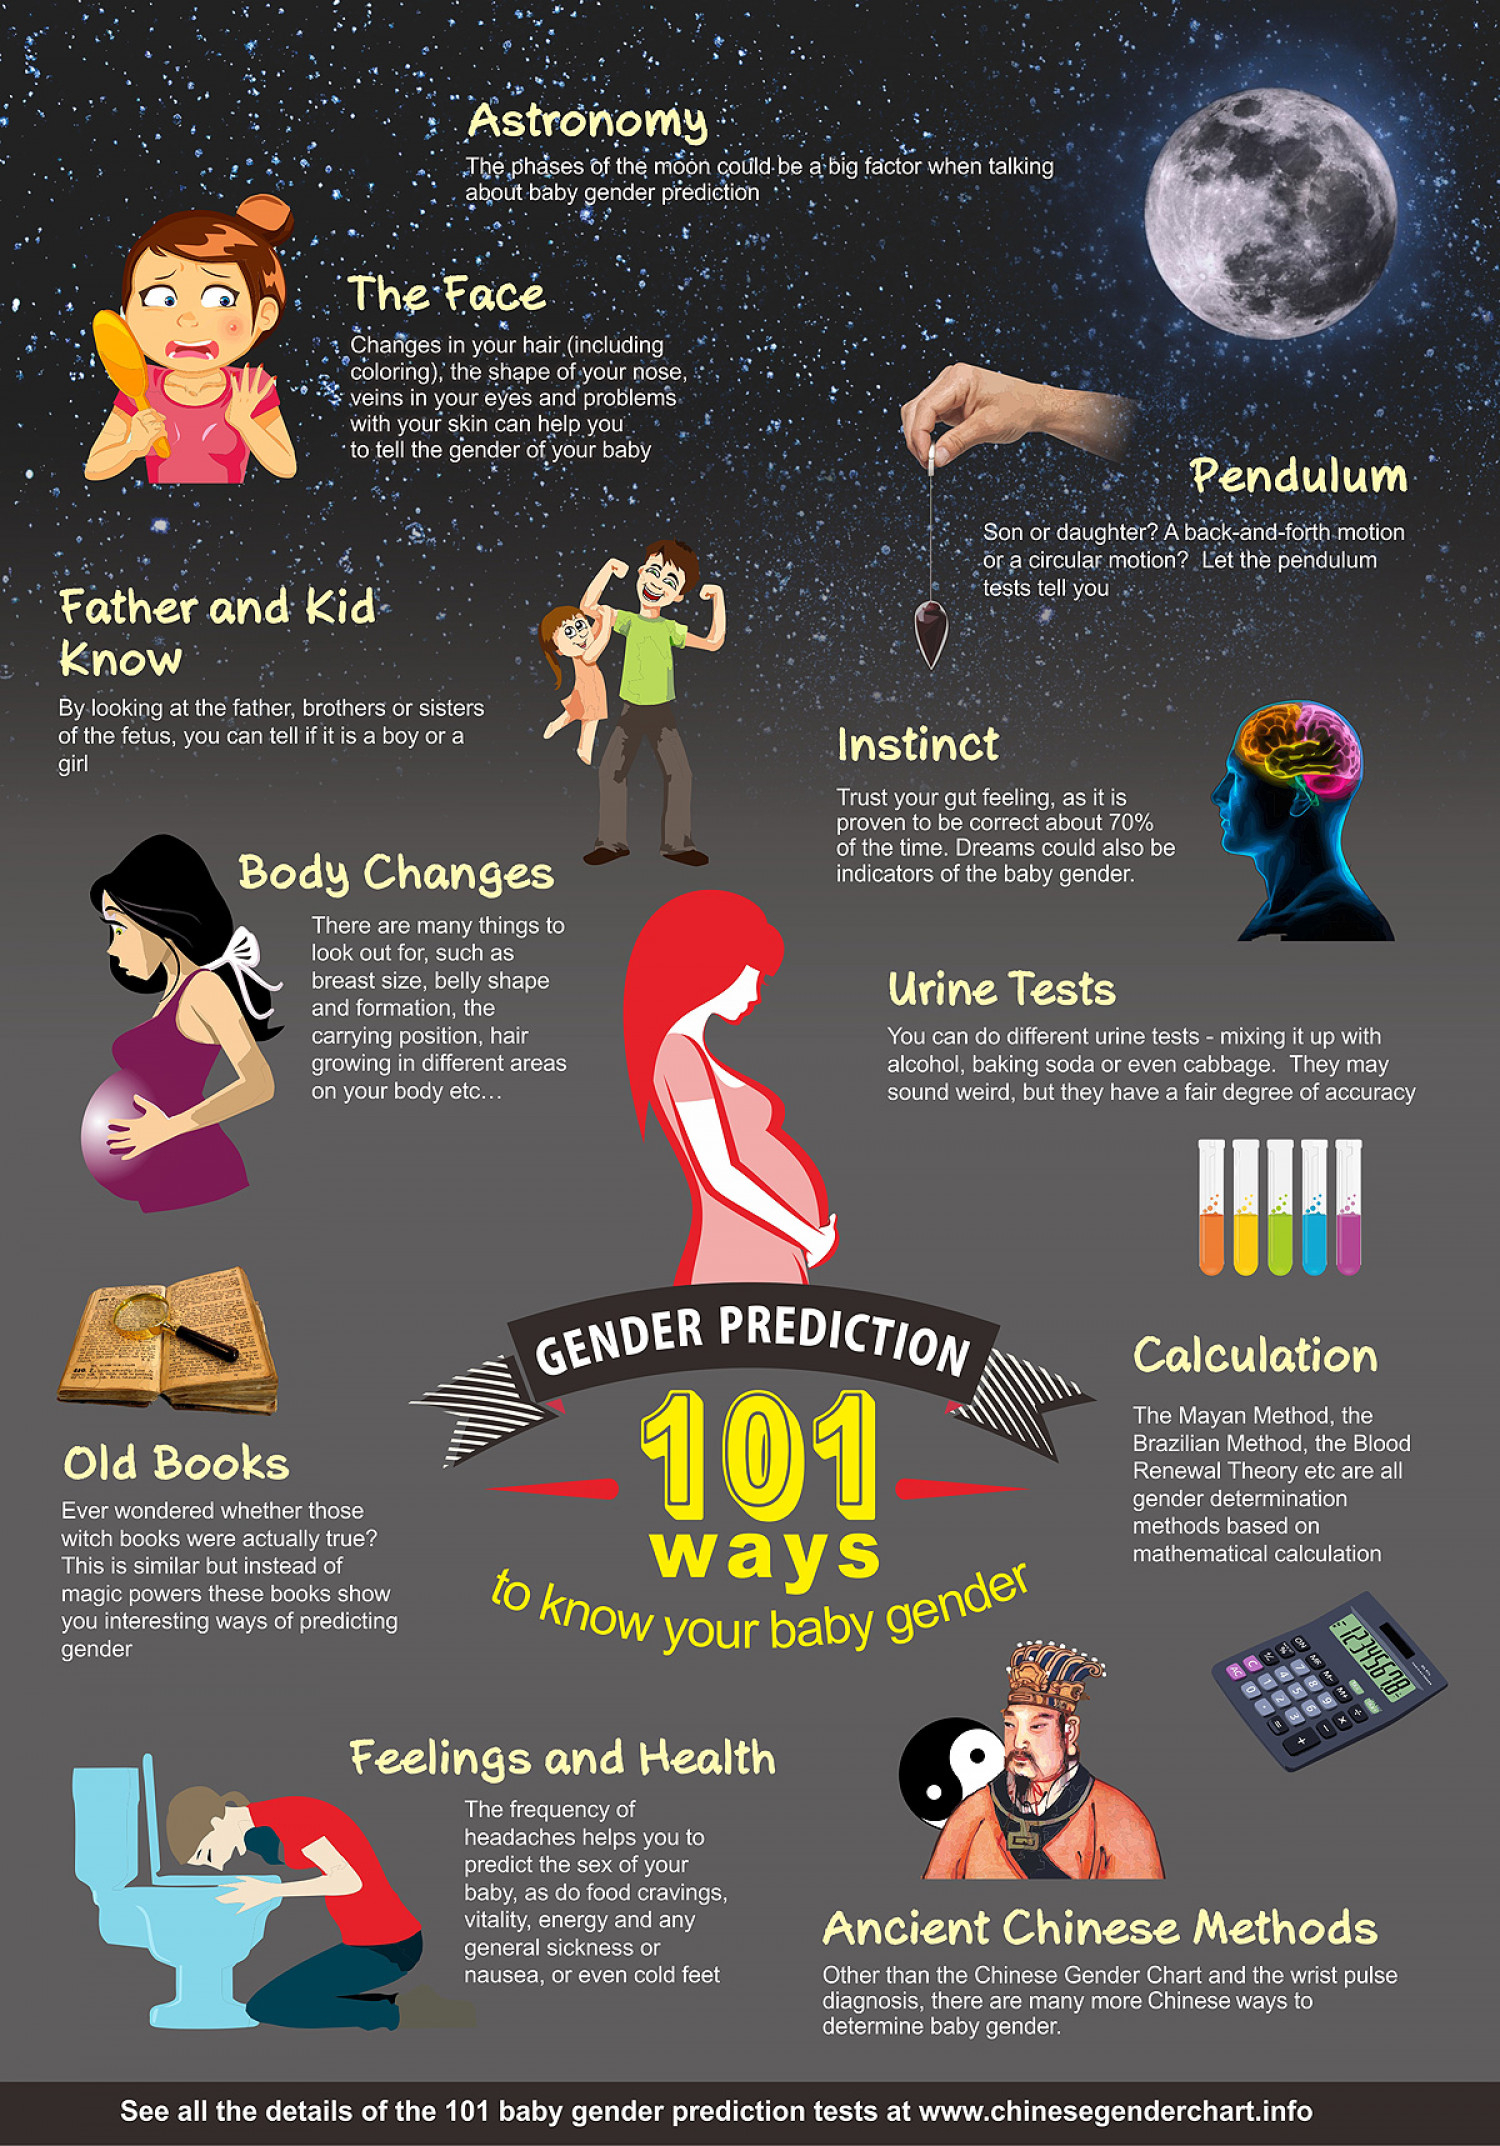 101 Ways To Know Your Unborn Baby Gender | Visual.ly inside Mayan Gender Prediction